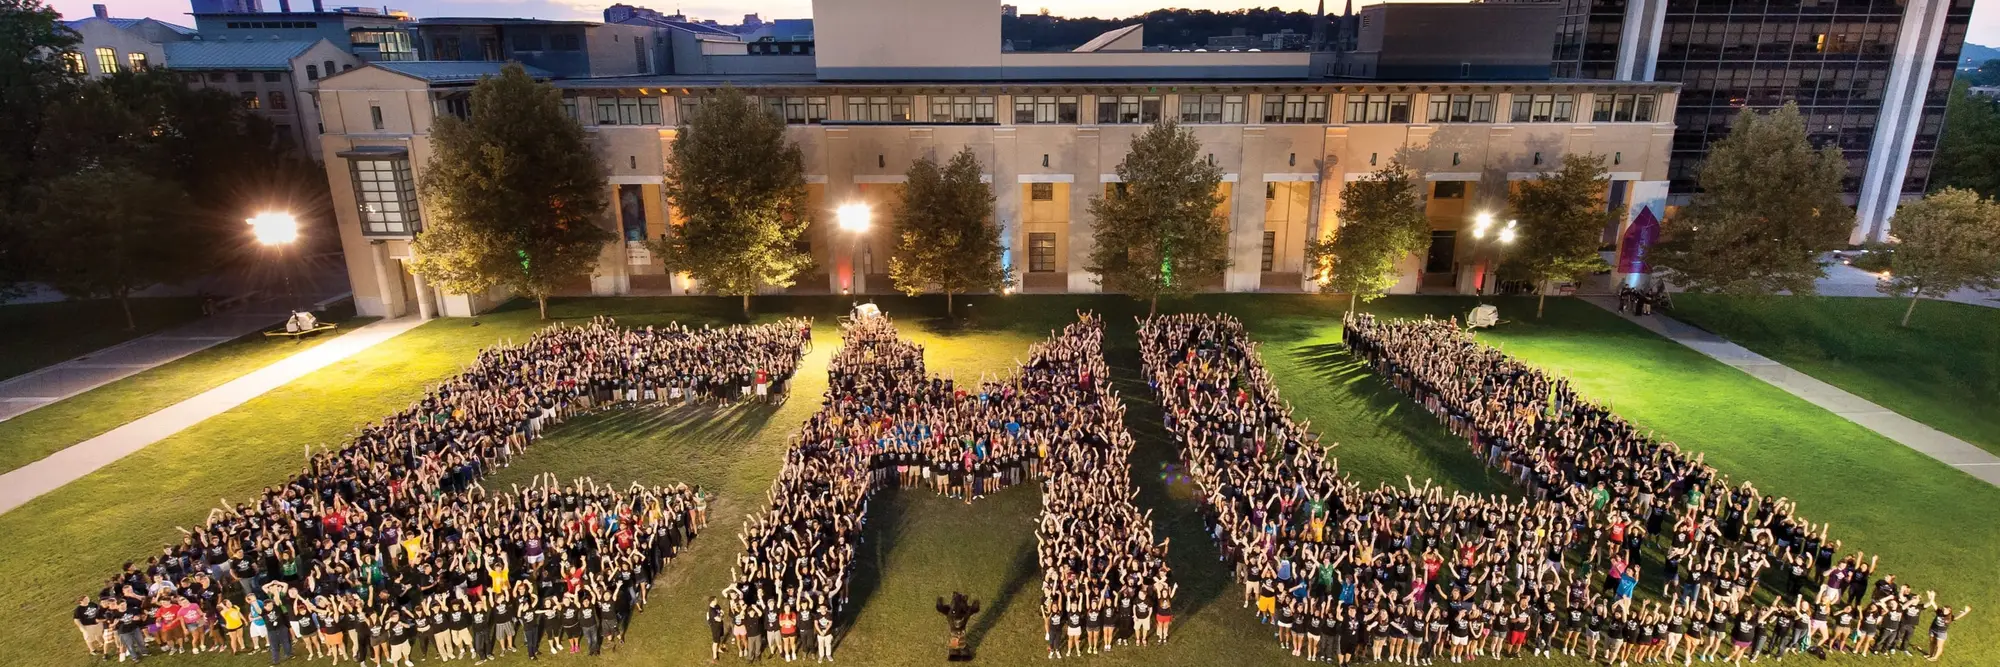 Students Spelling out CMU on Campus